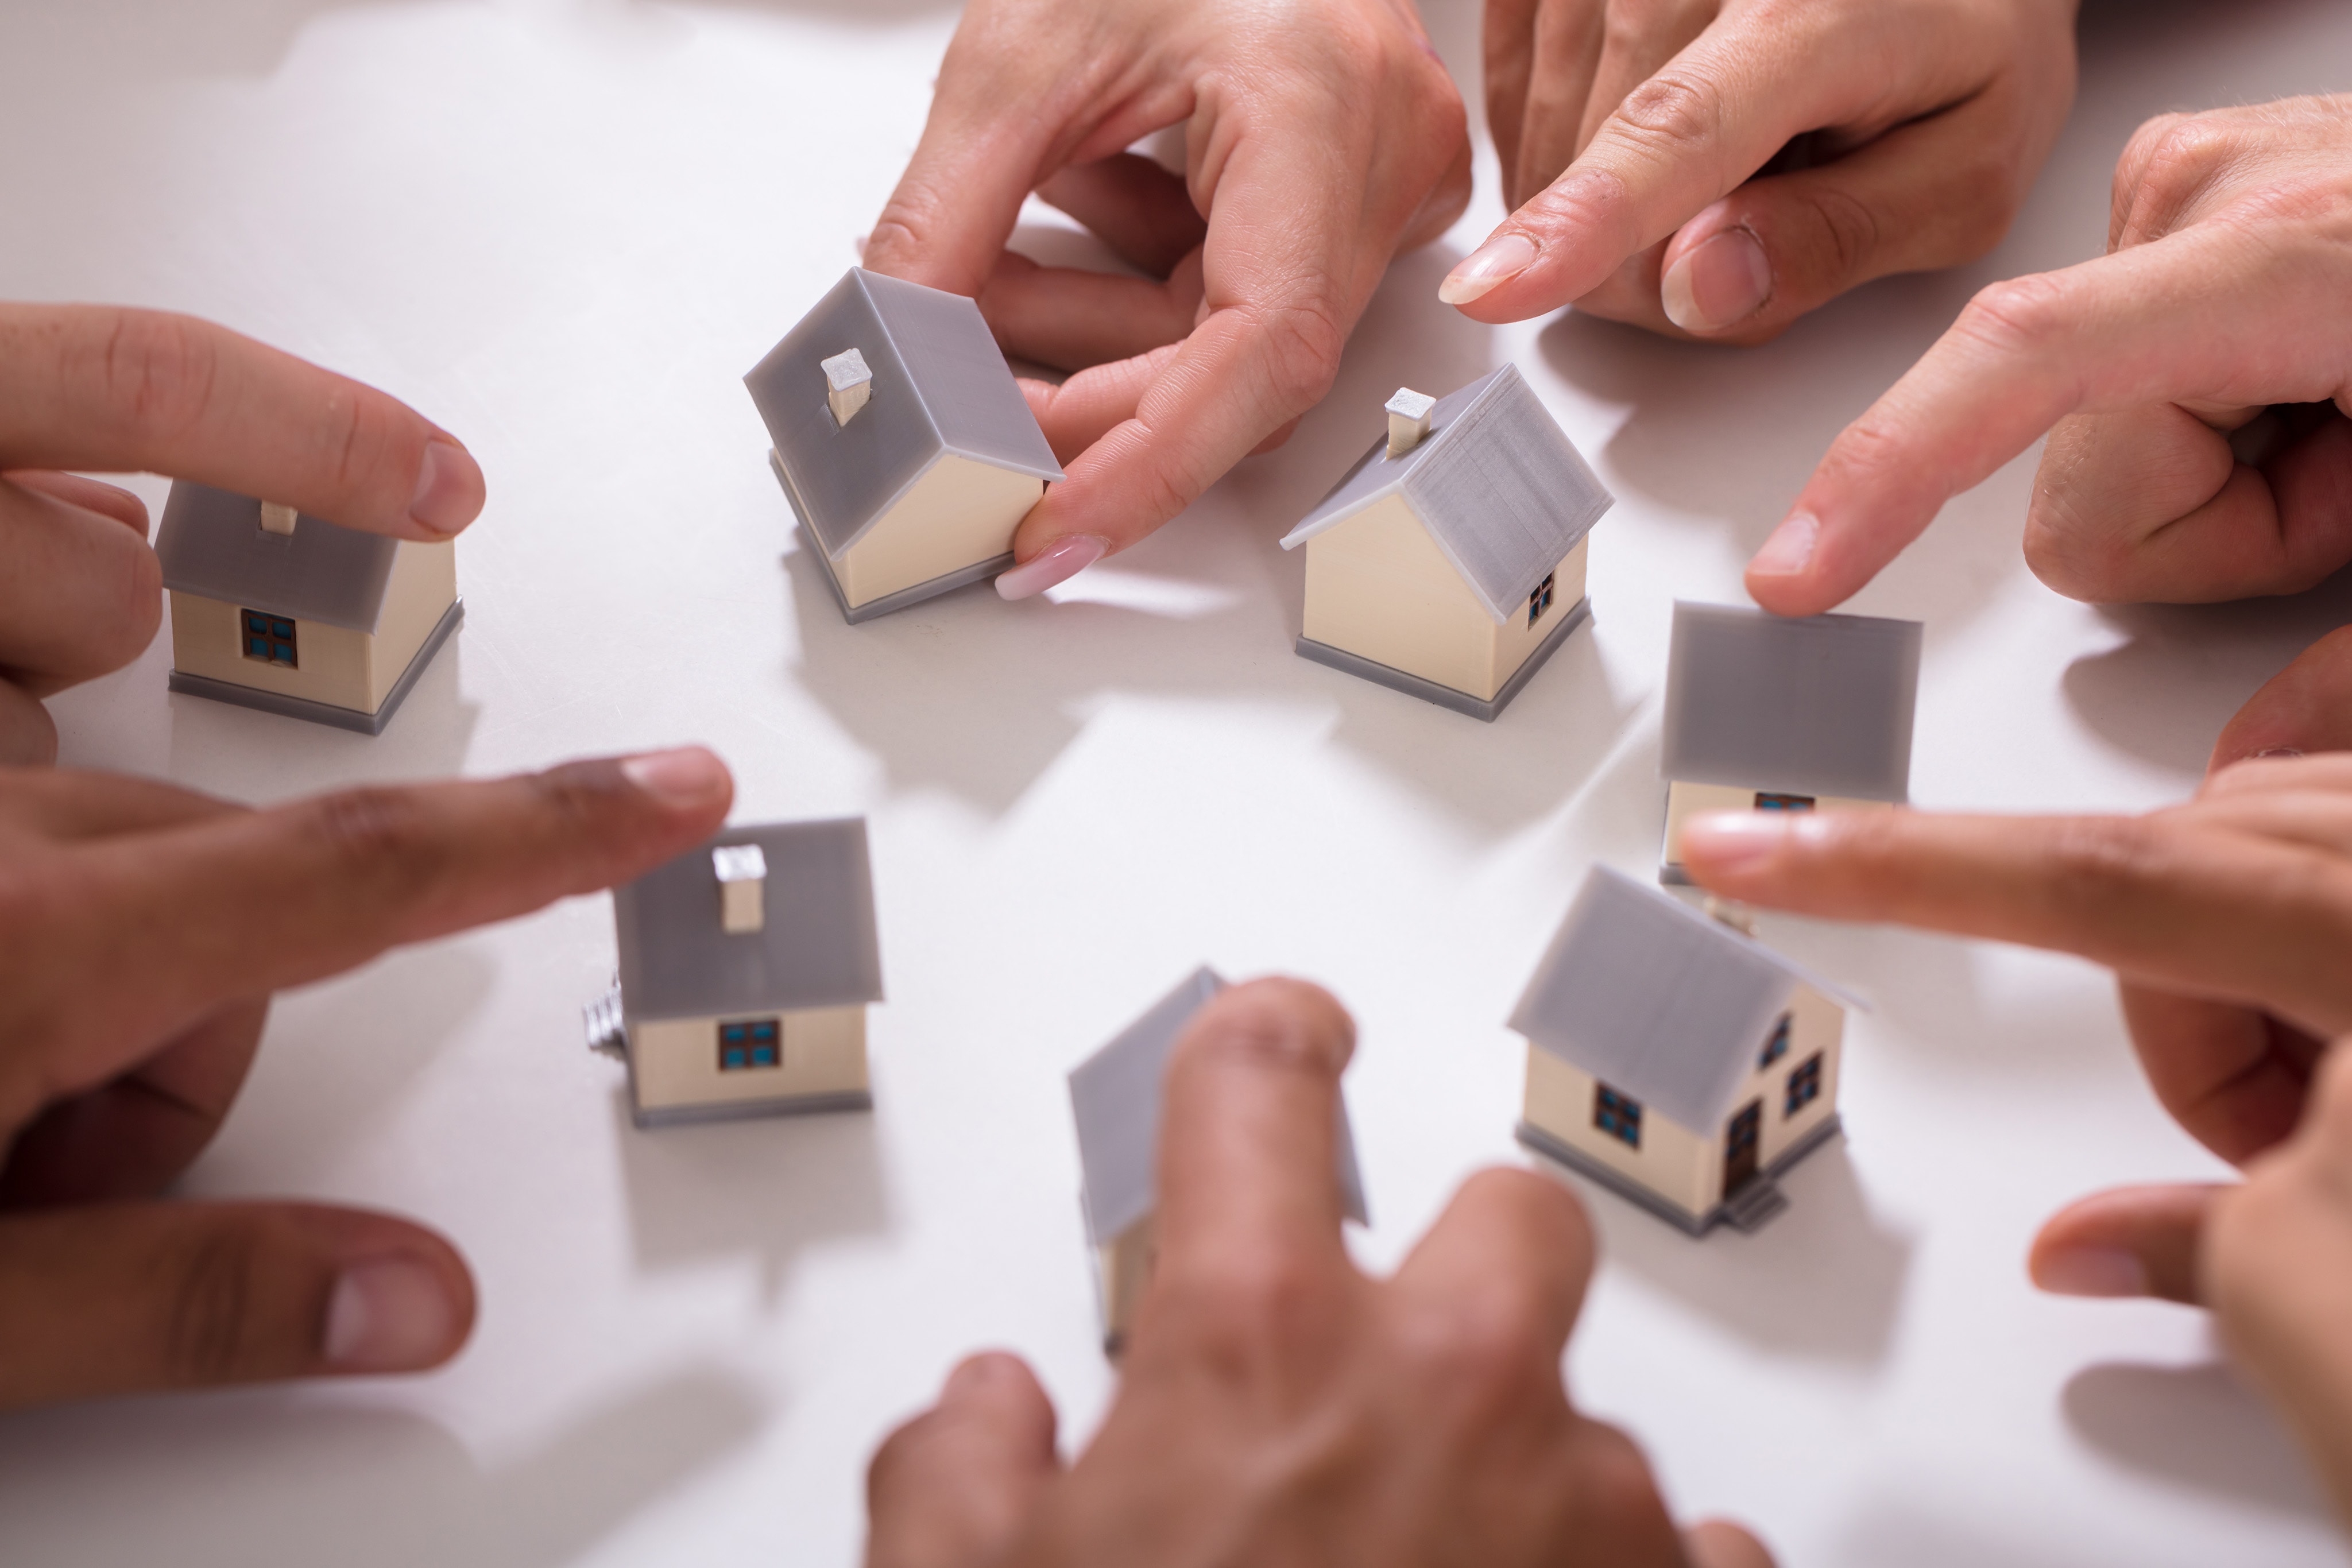 small house models with people touching them with their fingers